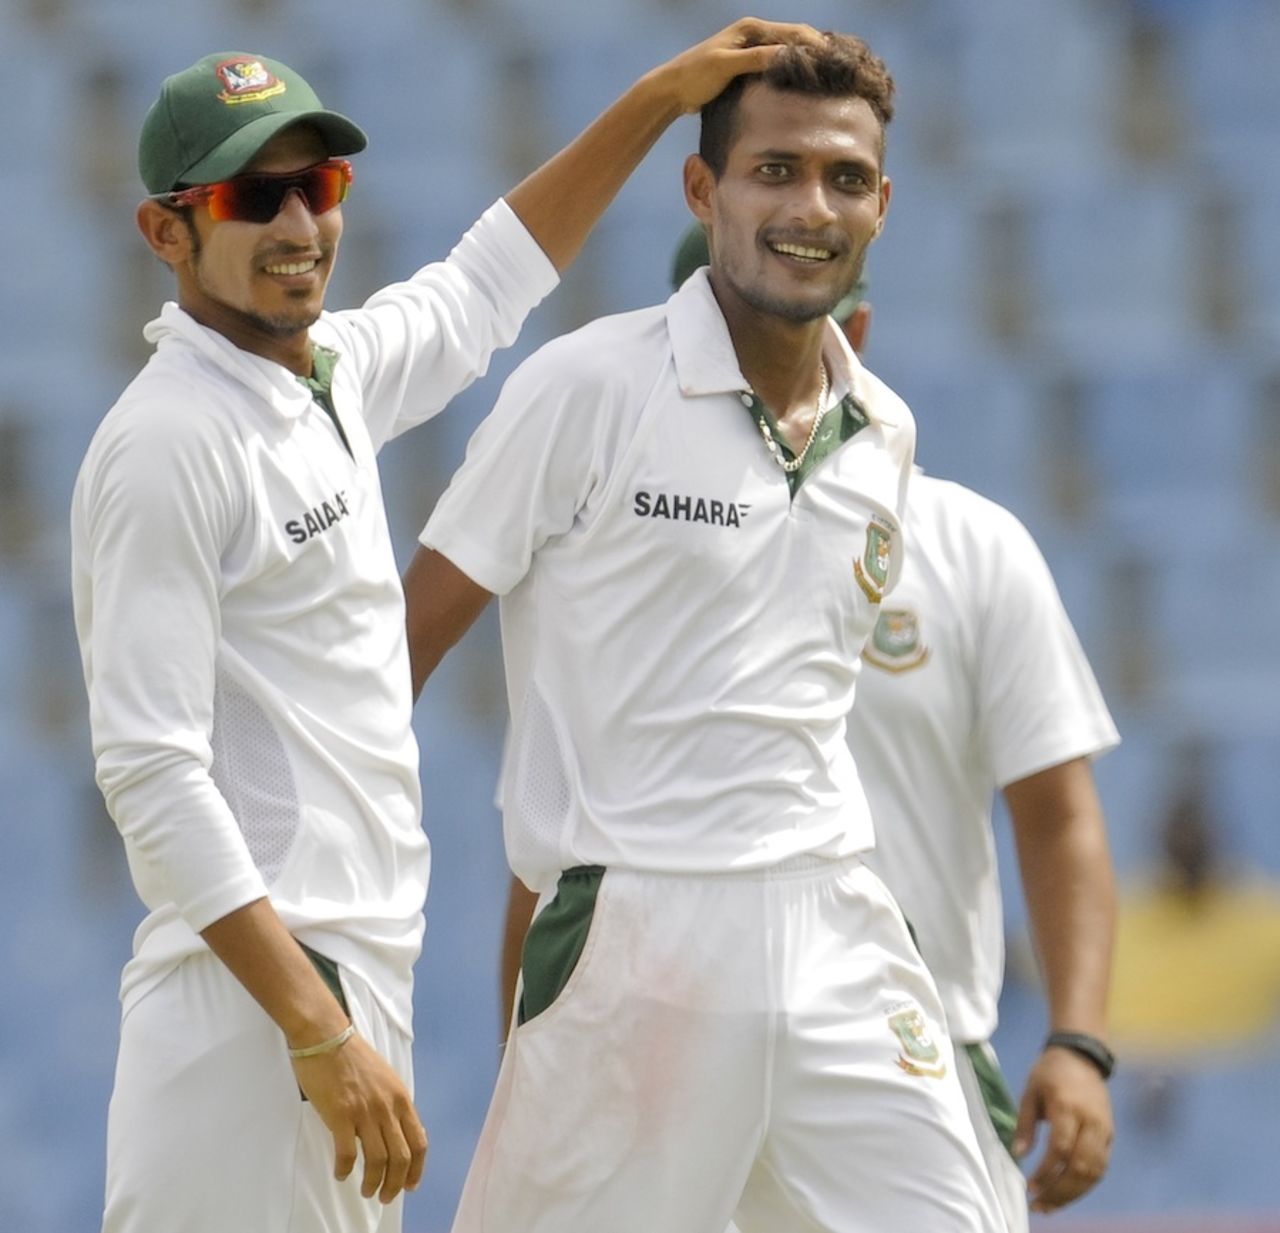 Nasir Hossain congratulates Shafiul Islam on a wicket, West Indies v Bangladesh, 2nd Test, St Lucia, 1st day, September 13, 2014